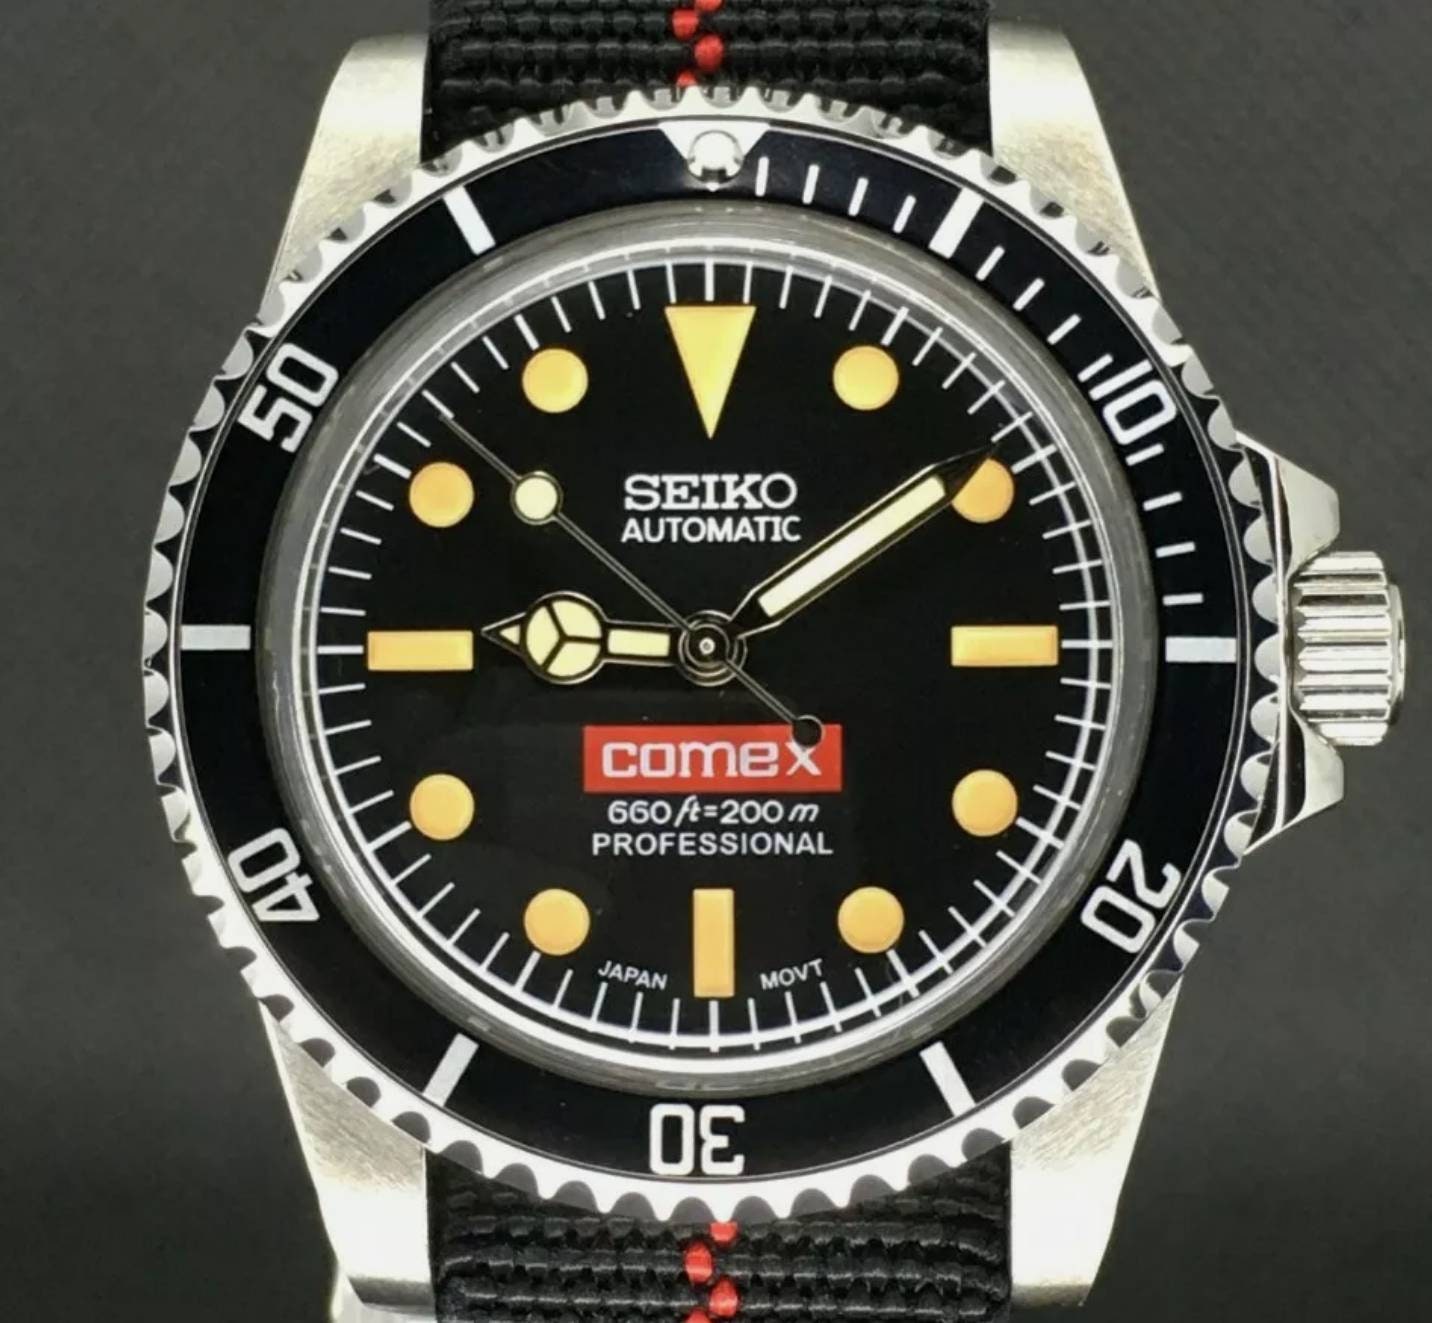 Seiko Mod Submariner Comex 5514 Vintage Diver NH35 Automatic - Etsy UK